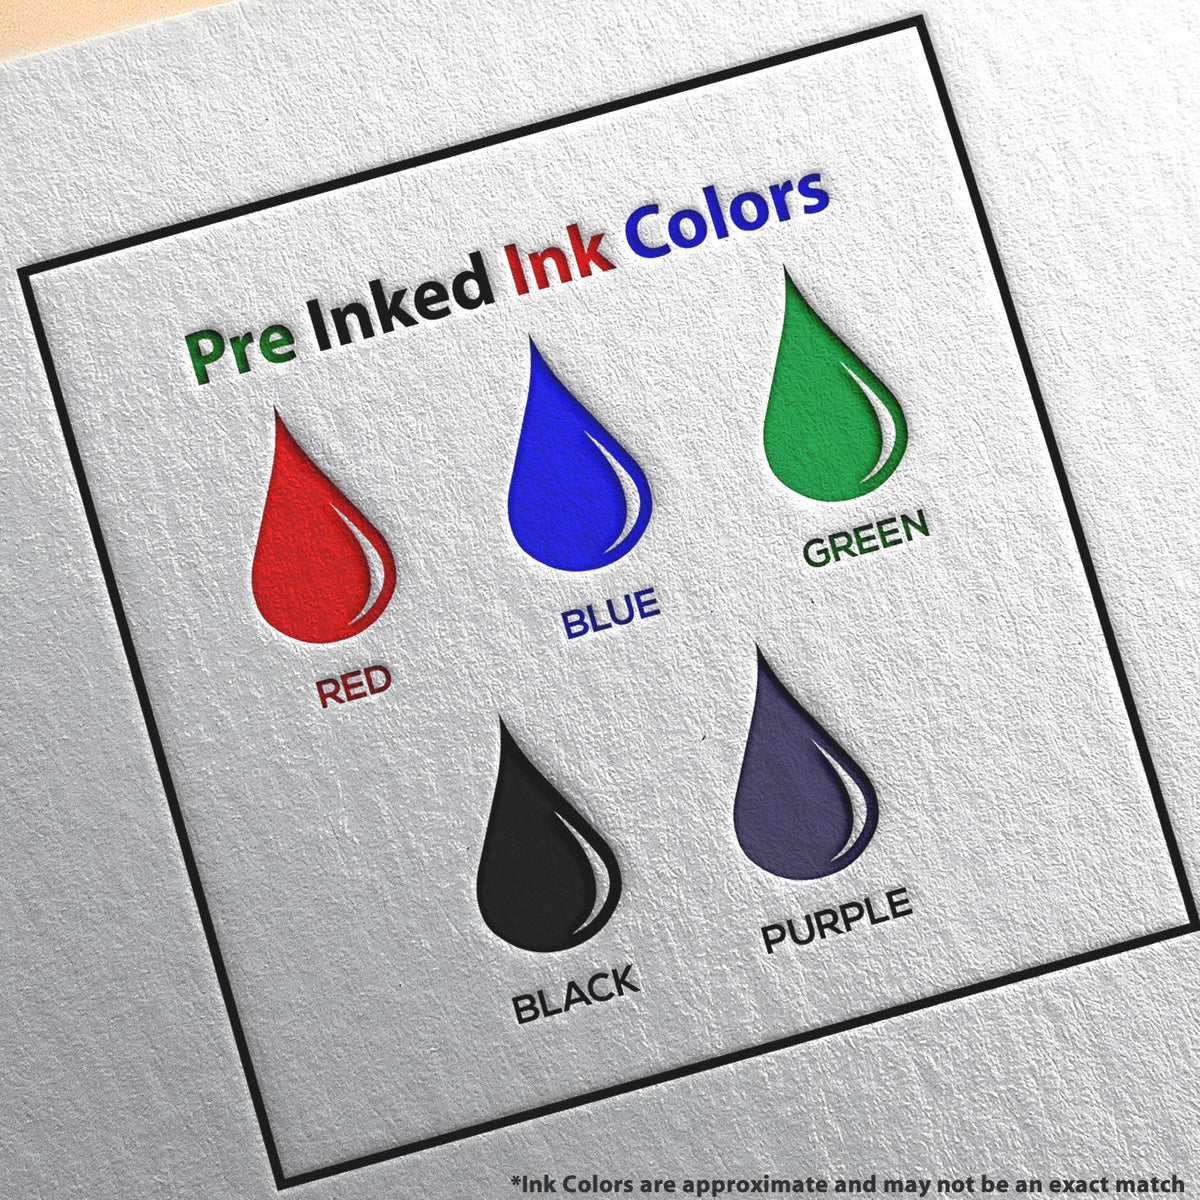 A picture showing the different ink colors or hues available for the MaxLight Premium Pre-Inked Illinois Rectangular Notarial Stamp product.